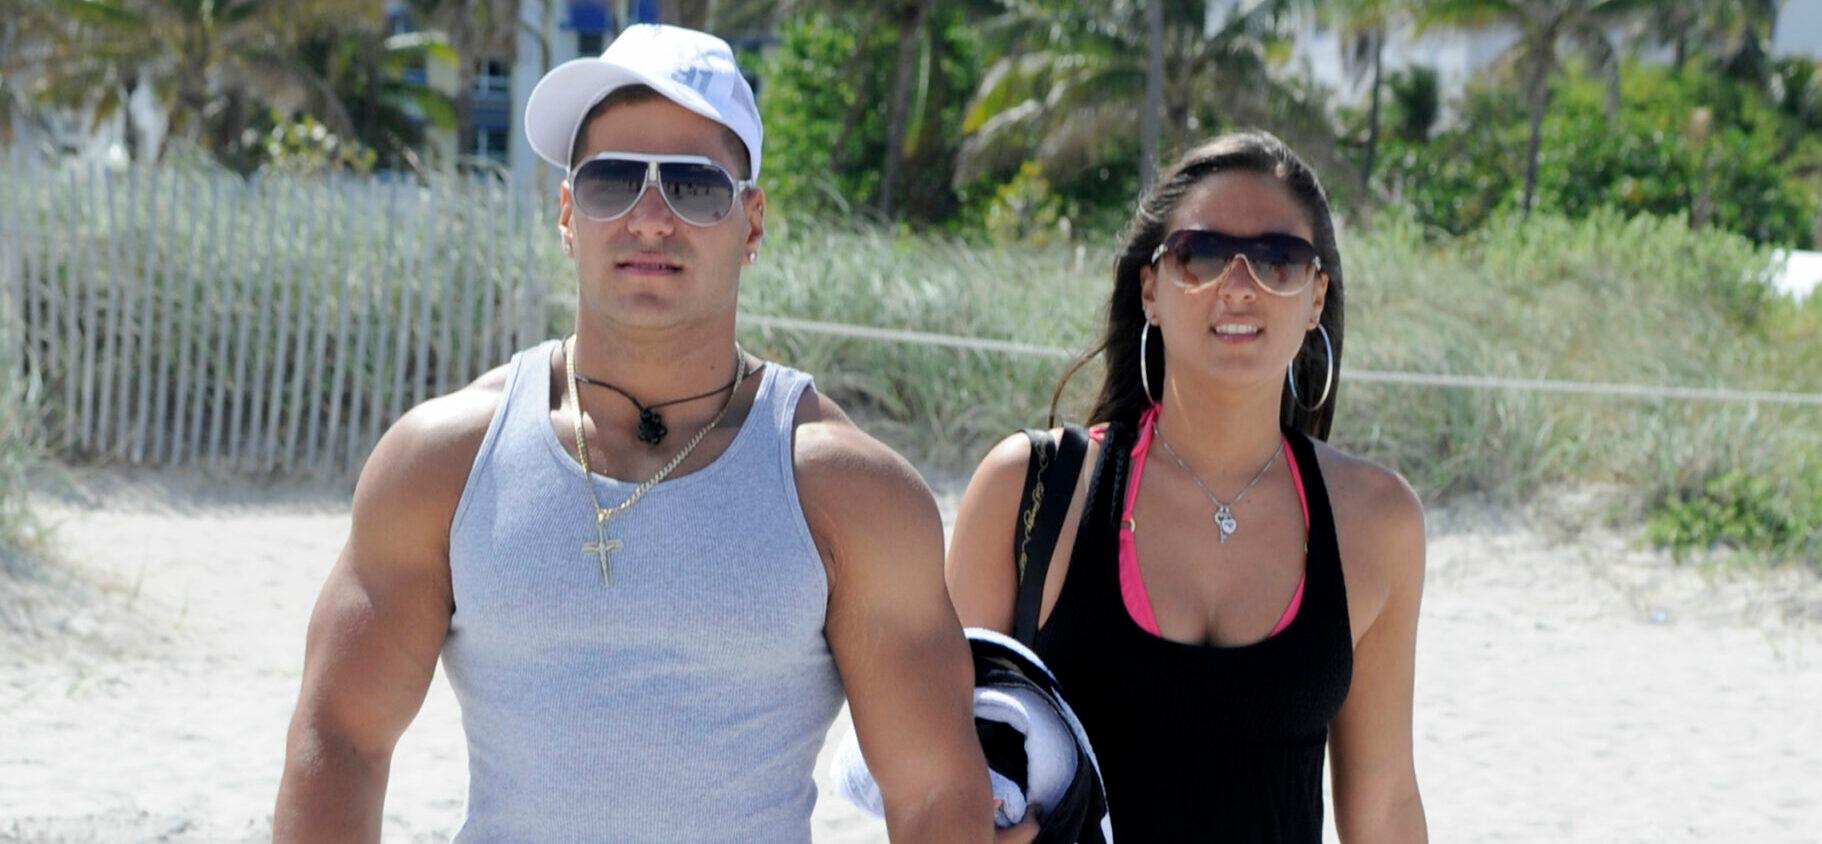 Jersey Shore cast members Sammi quot Sweetheart quot Giancola and Ronnie Ortiz-Magro show PDA on the beach in Miami